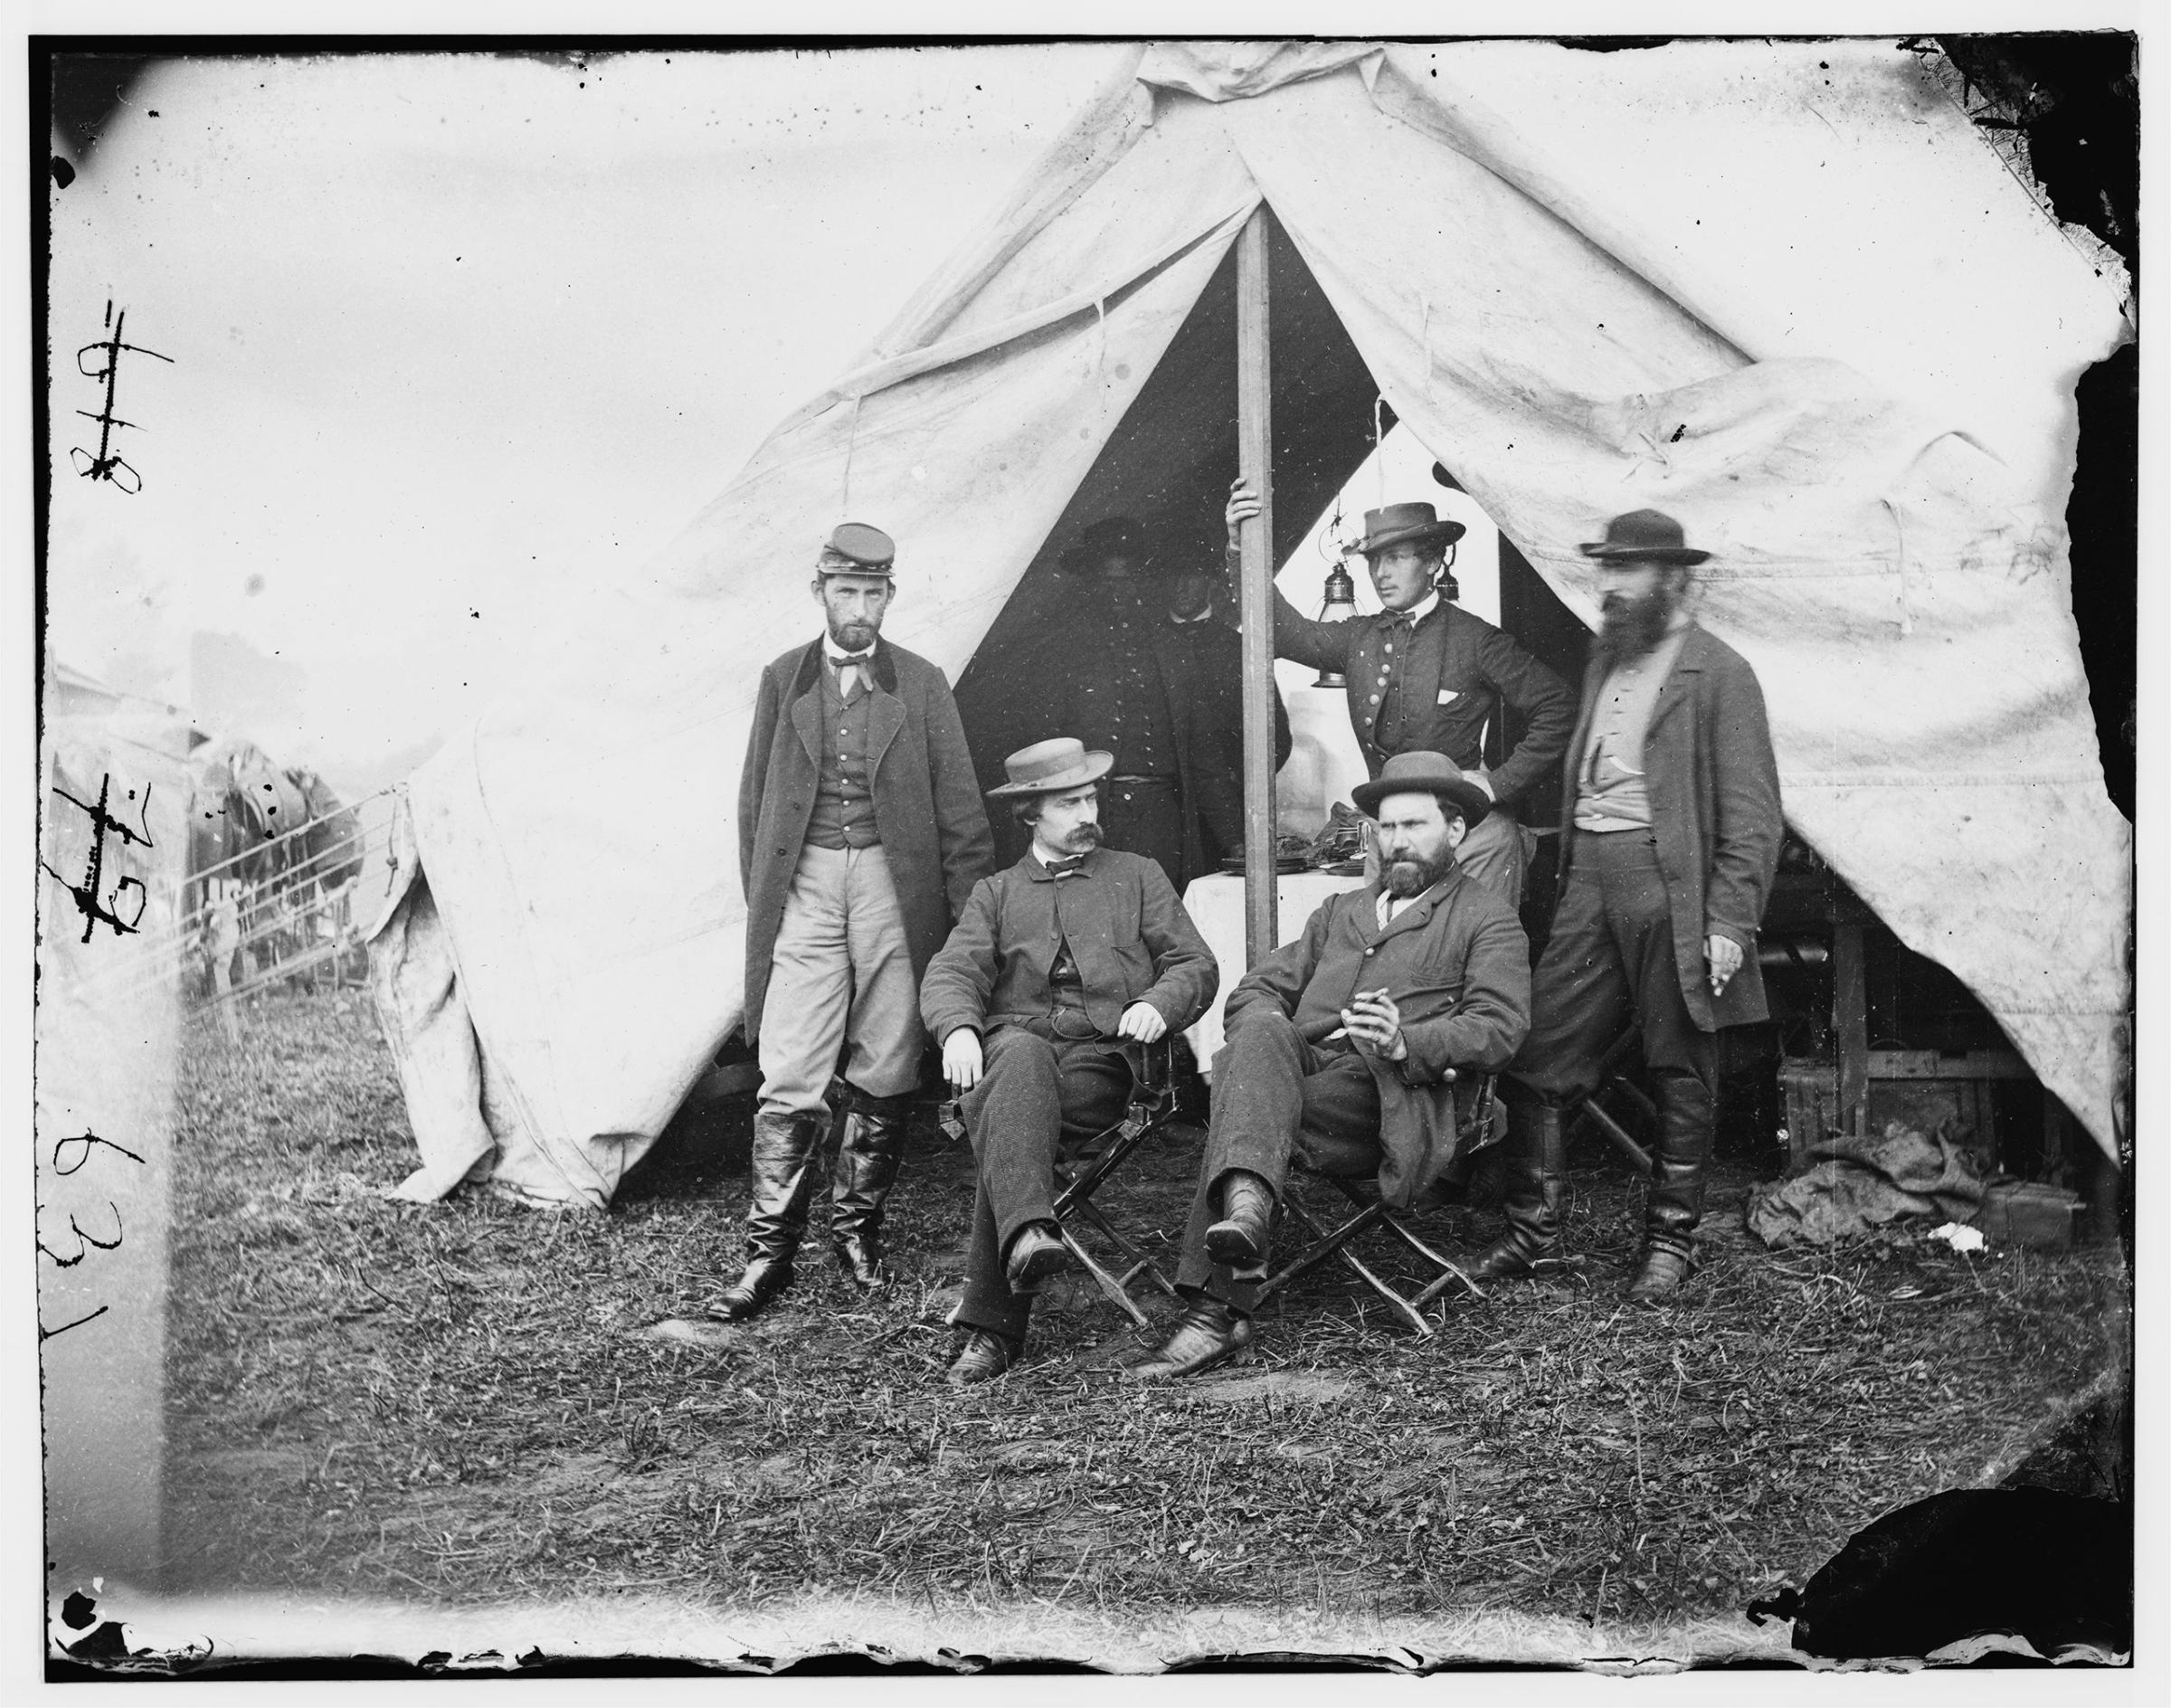 Detective Allan Pinkerton (sitting on the right) at Antietam during the Civil War. Standing behind Pinkerton holding the tent pole is believed to be Kate Warne, the first female detective in America, dressed as a man.